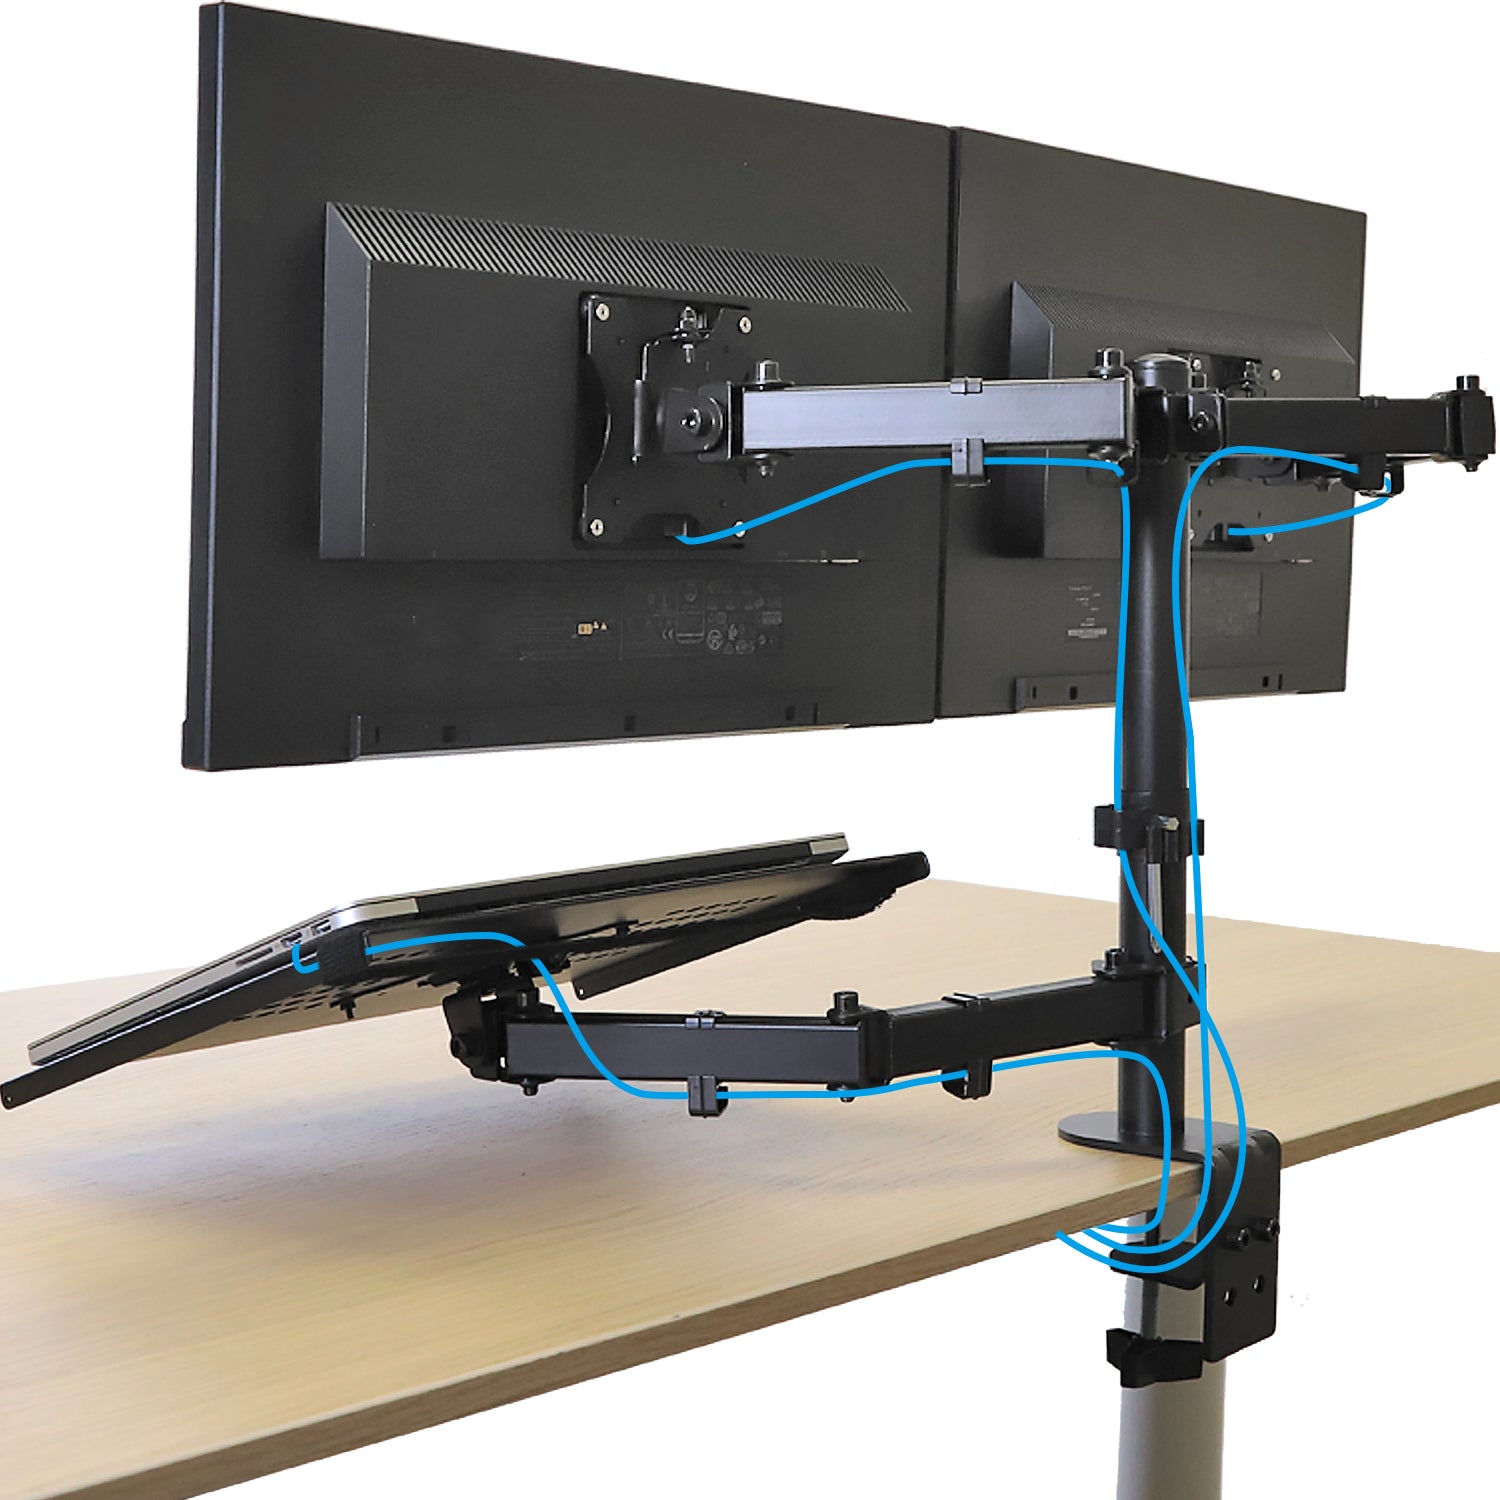 Aeons Dual Monitor and Laptop Tray Desk Mount, 3-in-1 Adjustable Triple Arm fits 27 inch Screen with VESA, Clamp and Cable Management, Black